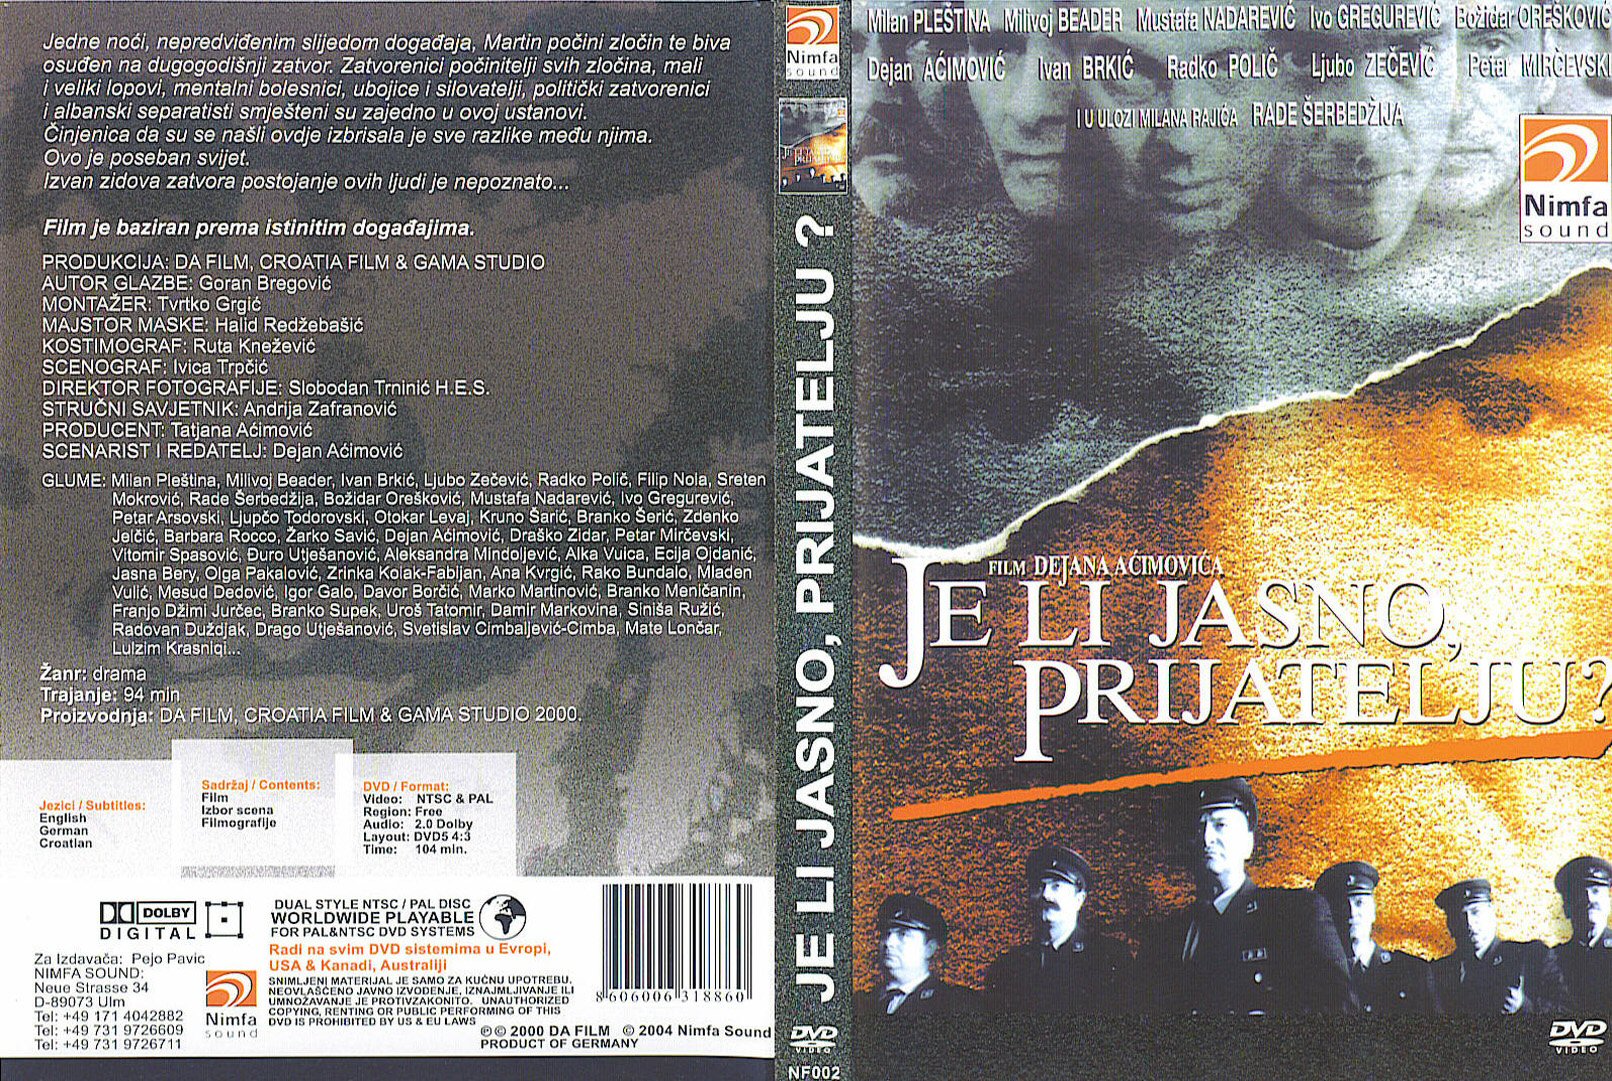 Click to view full size image -  DVD Cover - J - je_li_jasno_prijatelju_dvd - je_li_jasno_prijatelju_dvd.jpg